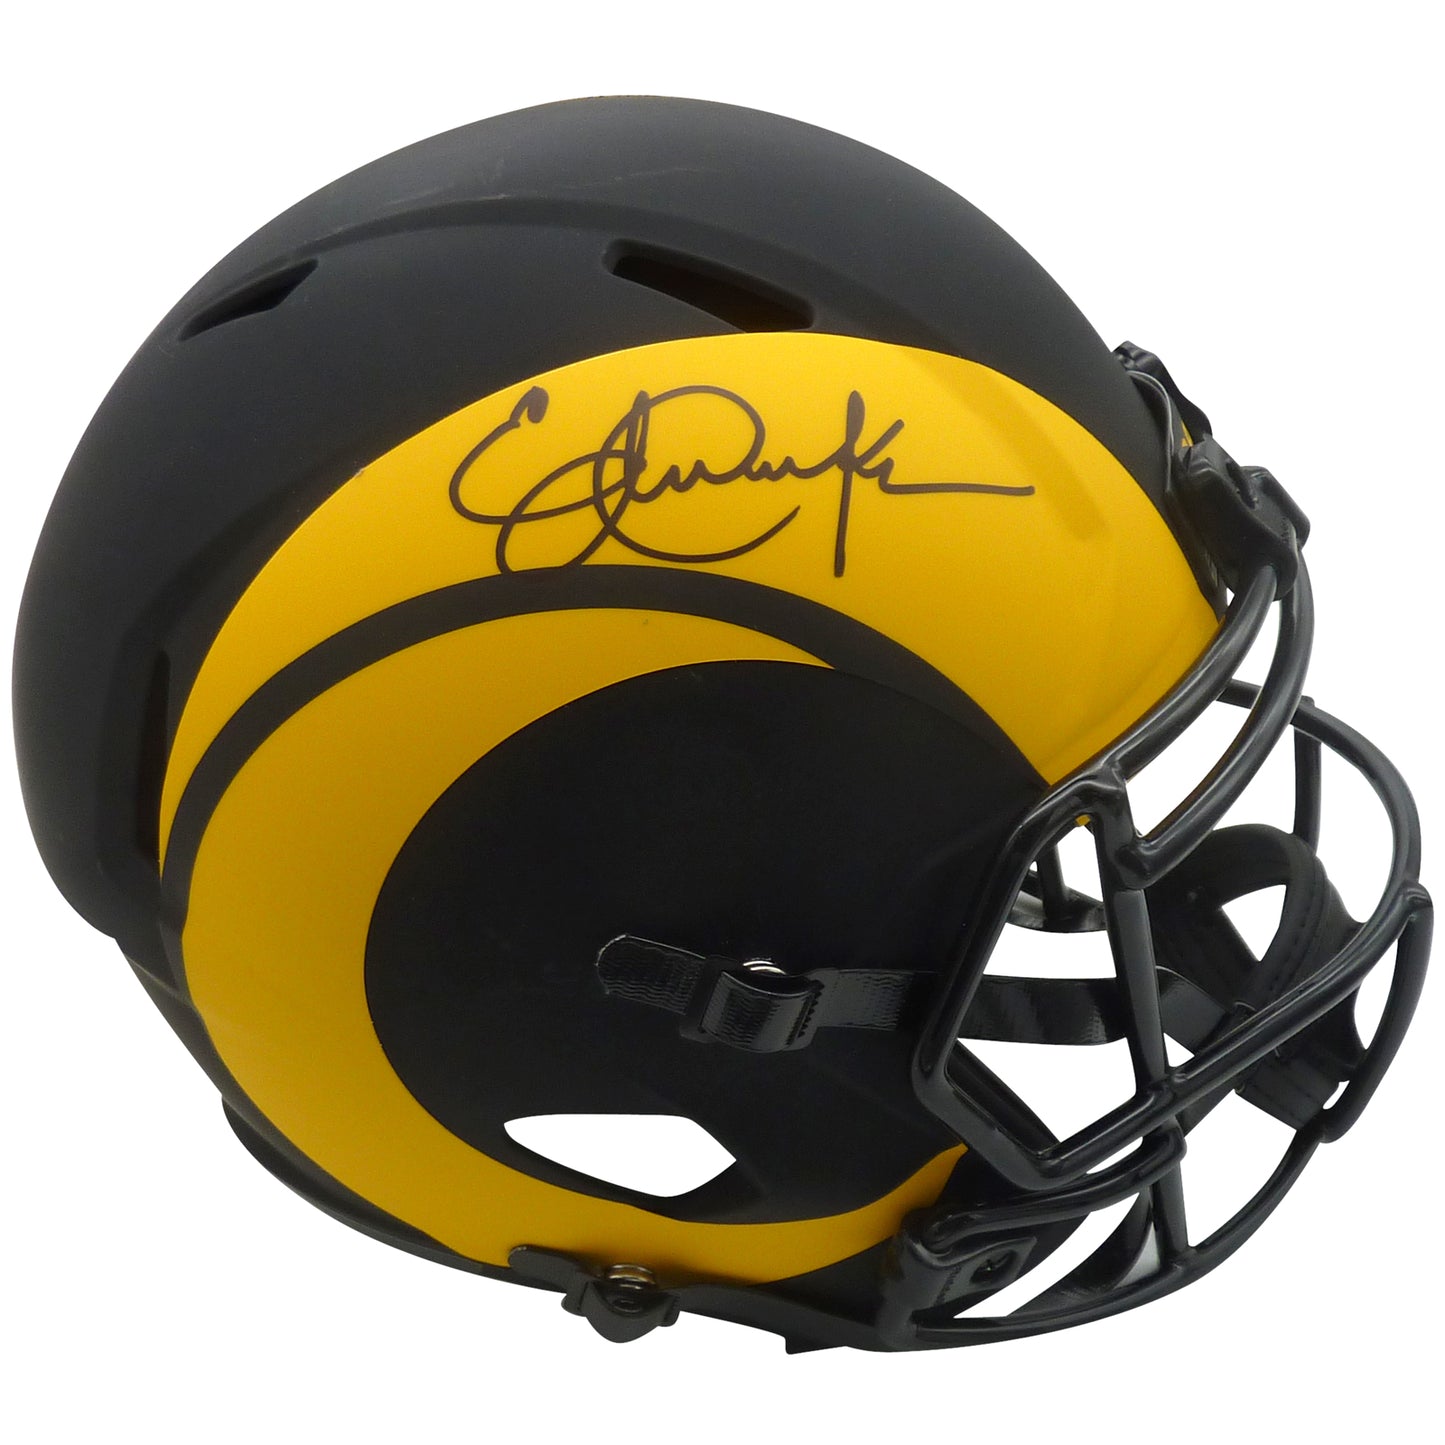 Eric Dickerson Autographed Los Angeles Rams (ECLIPSE Alternate) Deluxe Full-Size Replica Helmet - BAS